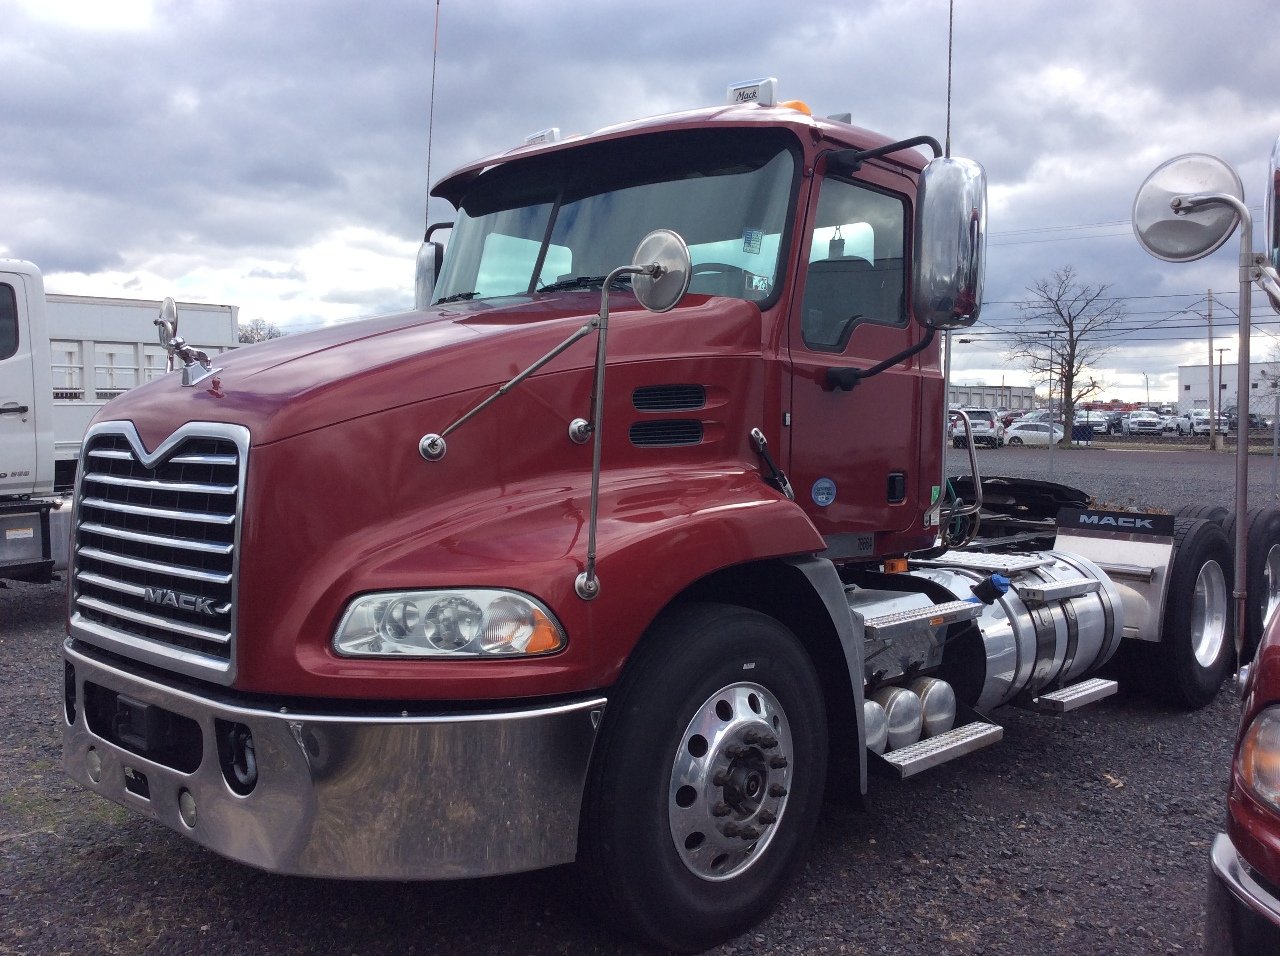 Used Truck Inventory - 1001883 01 2 - 148